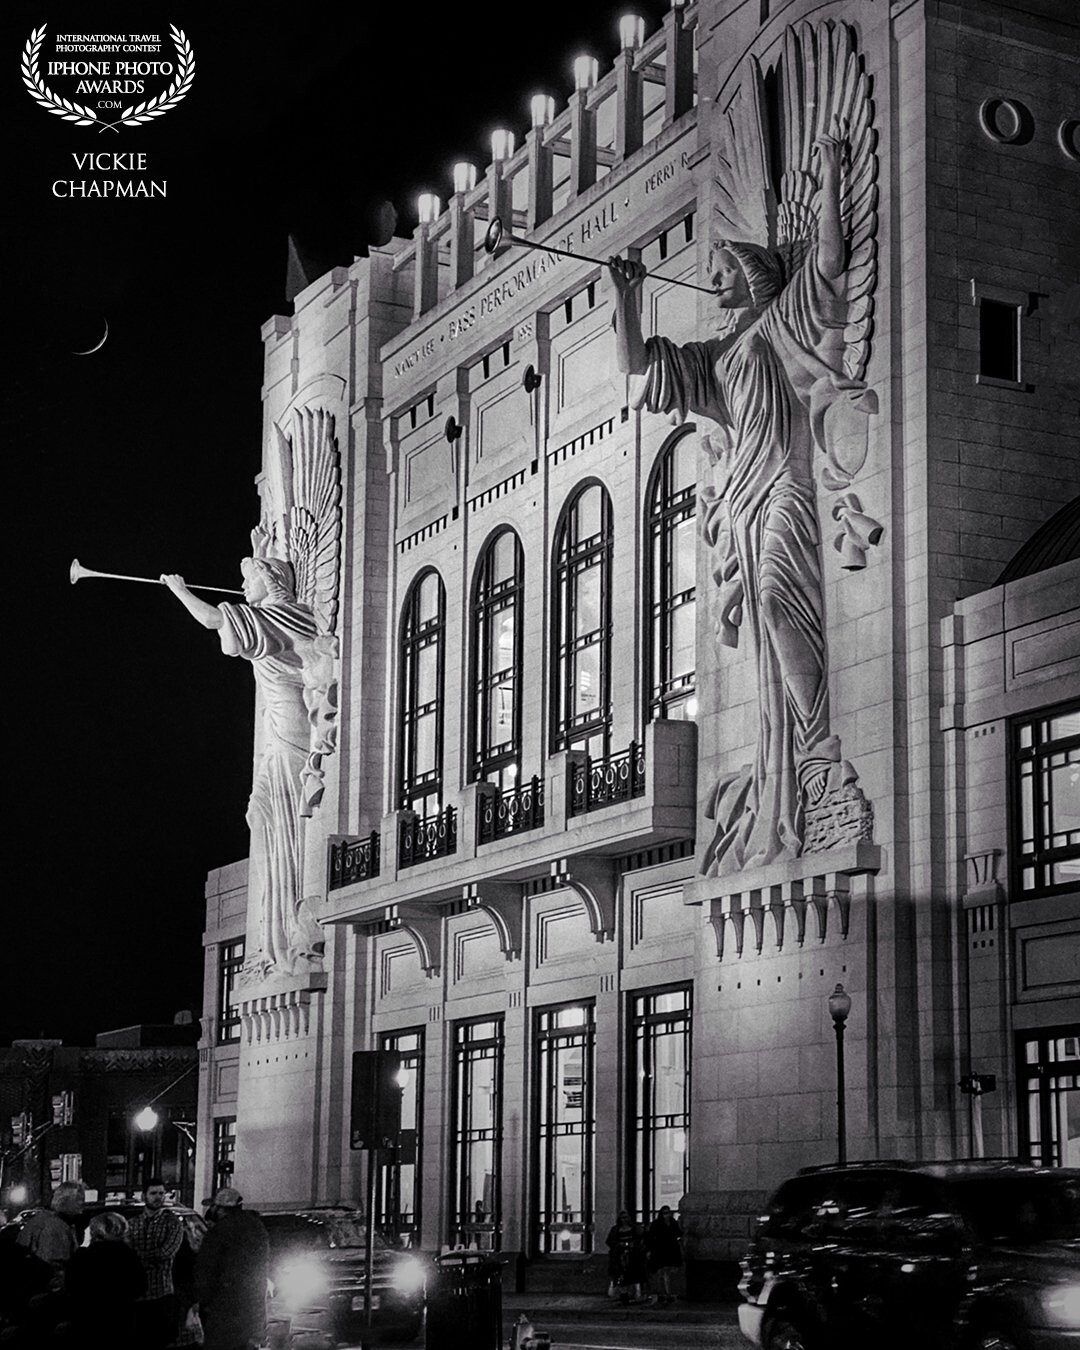 The Bass Performance Hall Grand Facade <br />
The two 48 foot tall angels of The Bass Performance Hall in downtown Fort Worth, Texas draw photographers worldwide. I am blessed to live here and never miss my chance at a photo opportunity with these beautiful cultural icons of North Texas. This photo is one of my favorites.